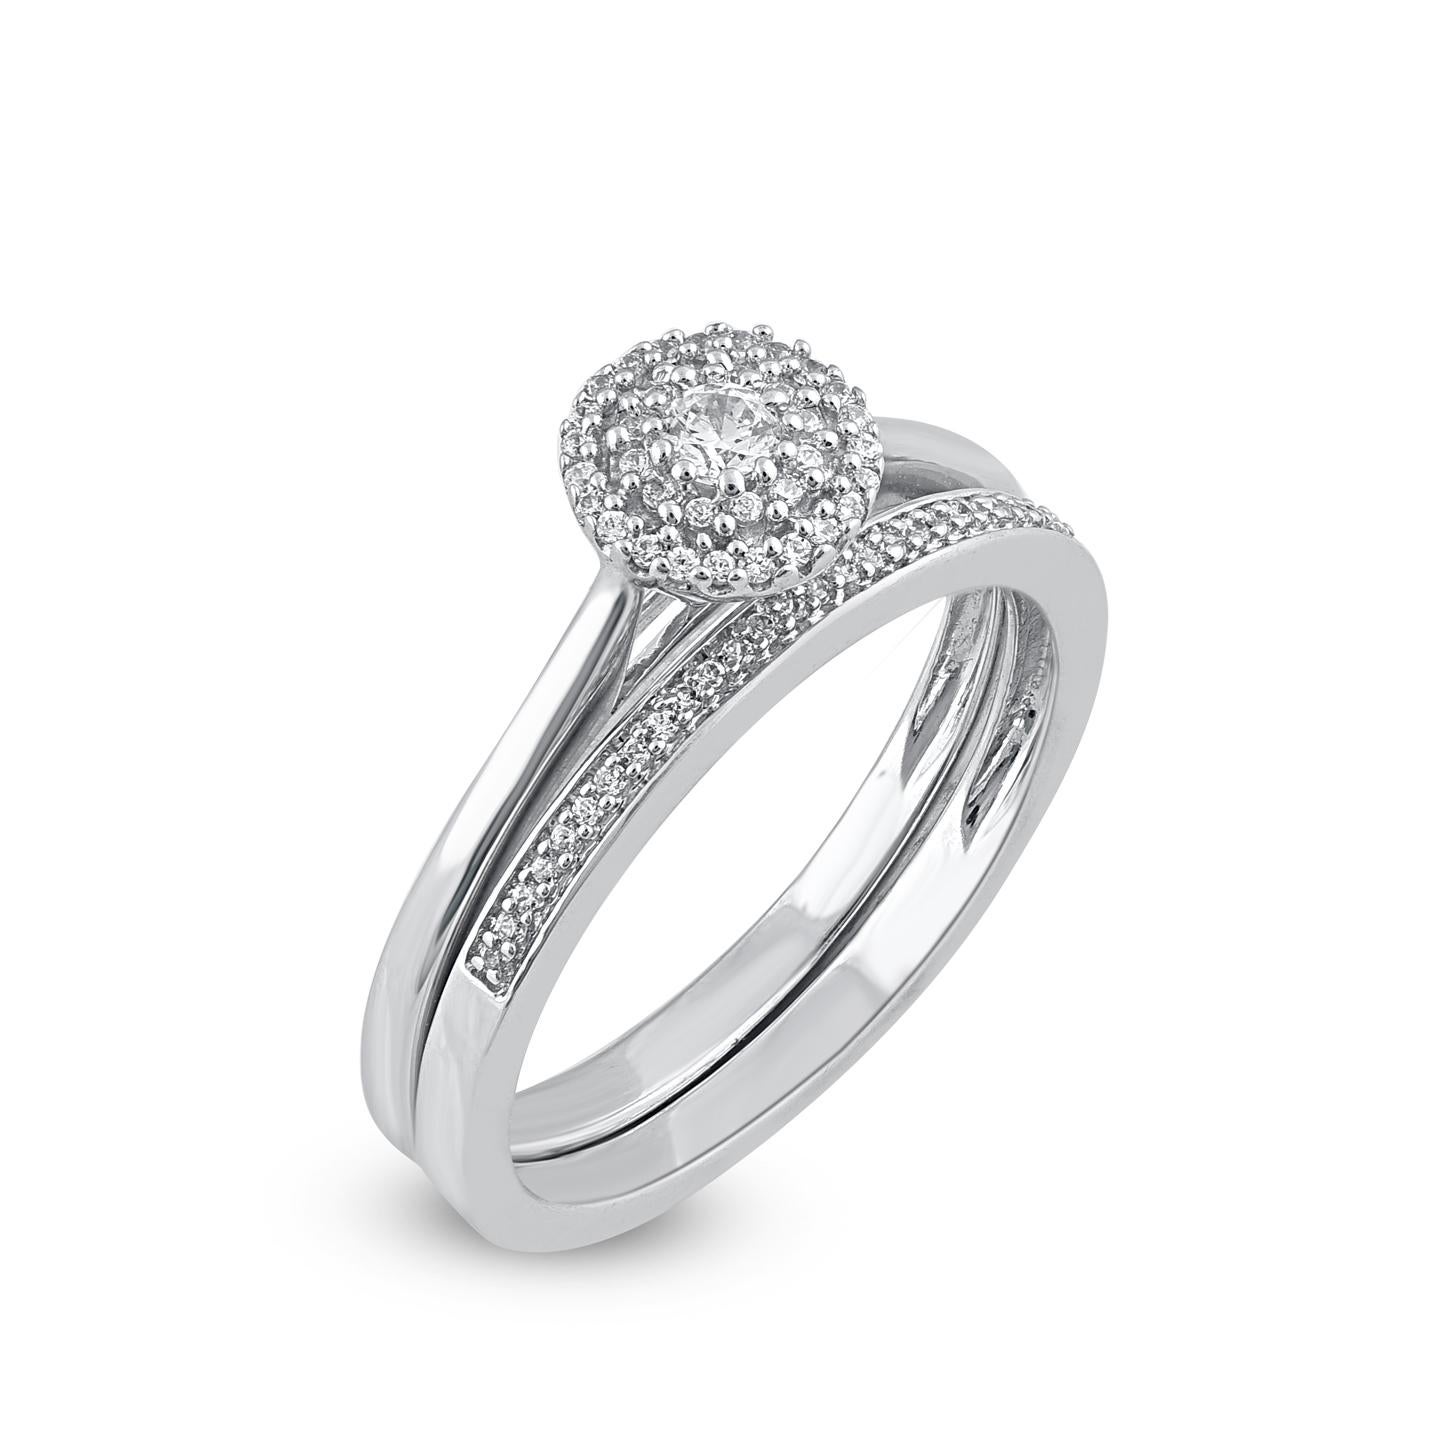 Express your love for her in the most classic way with this diamond ring set. Crafted in 14 Karat white gold. This wedding ring features a sparkling 63 brilliant cut and single cut round diamond beautifully set in prong & pave setting. The total